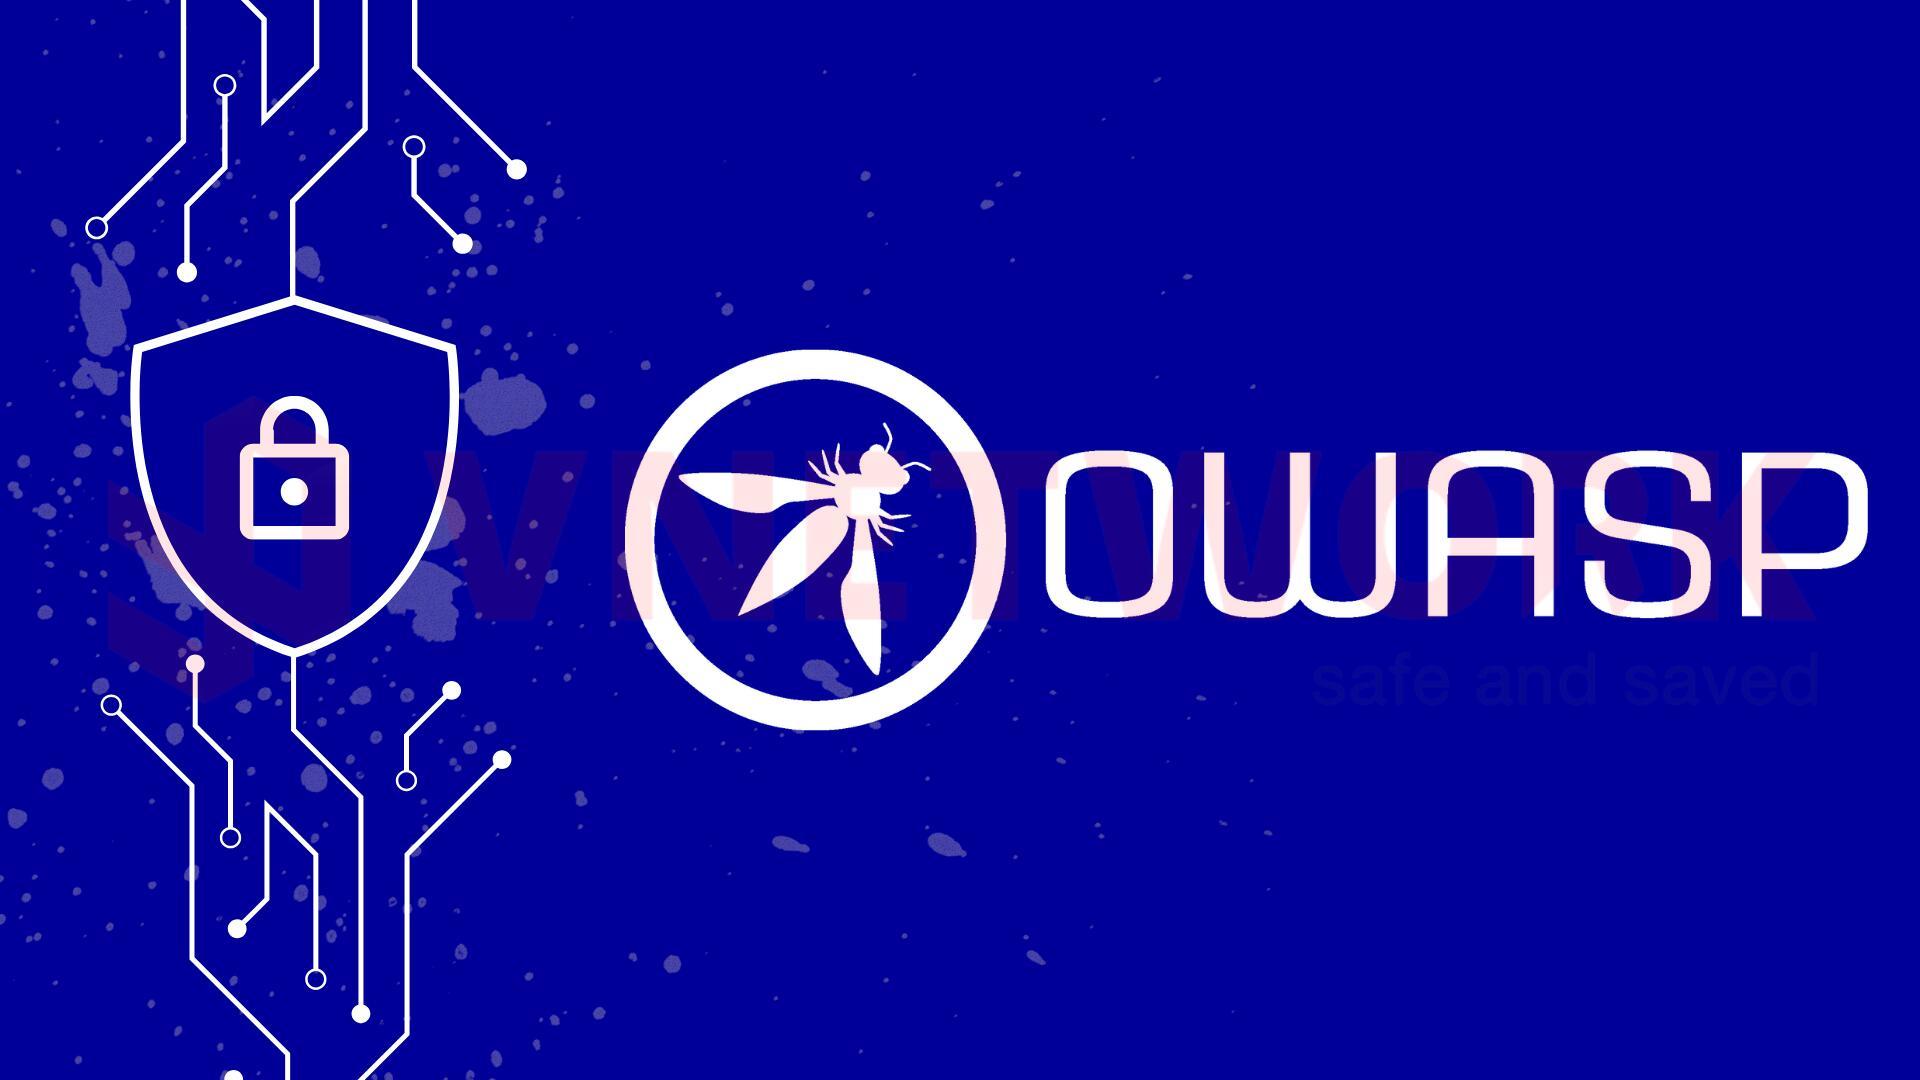 How to prevent the top 10 latest OWASP vulnerabilities